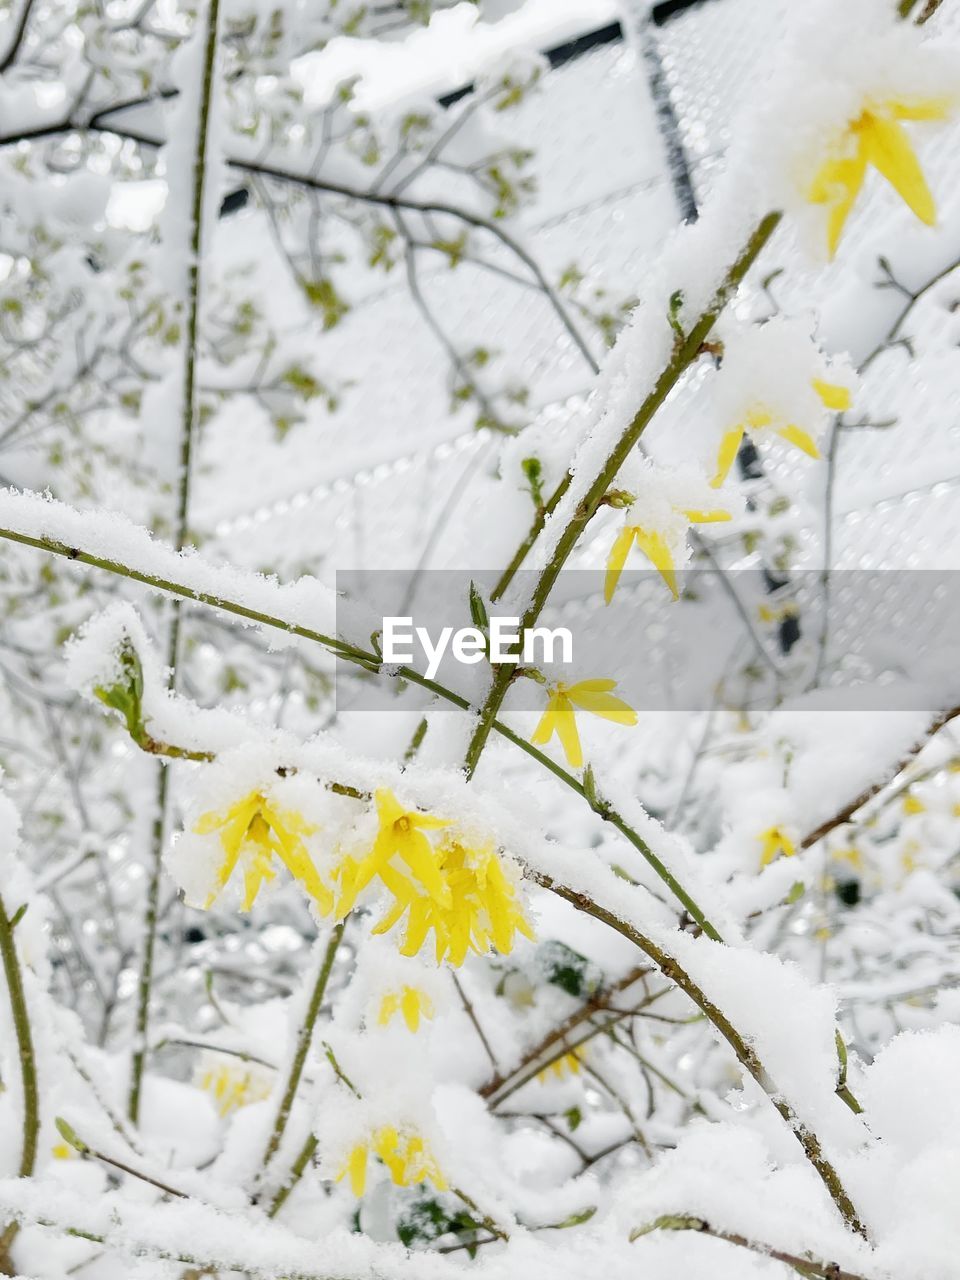 branch, plant, cold temperature, snow, winter, nature, beauty in nature, white, tree, no people, yellow, flower, leaf, freshness, spring, flowering plant, growth, close-up, twig, blossom, day, fragility, outdoors, focus on foreground, frost, frozen, freezing, springtime, environment